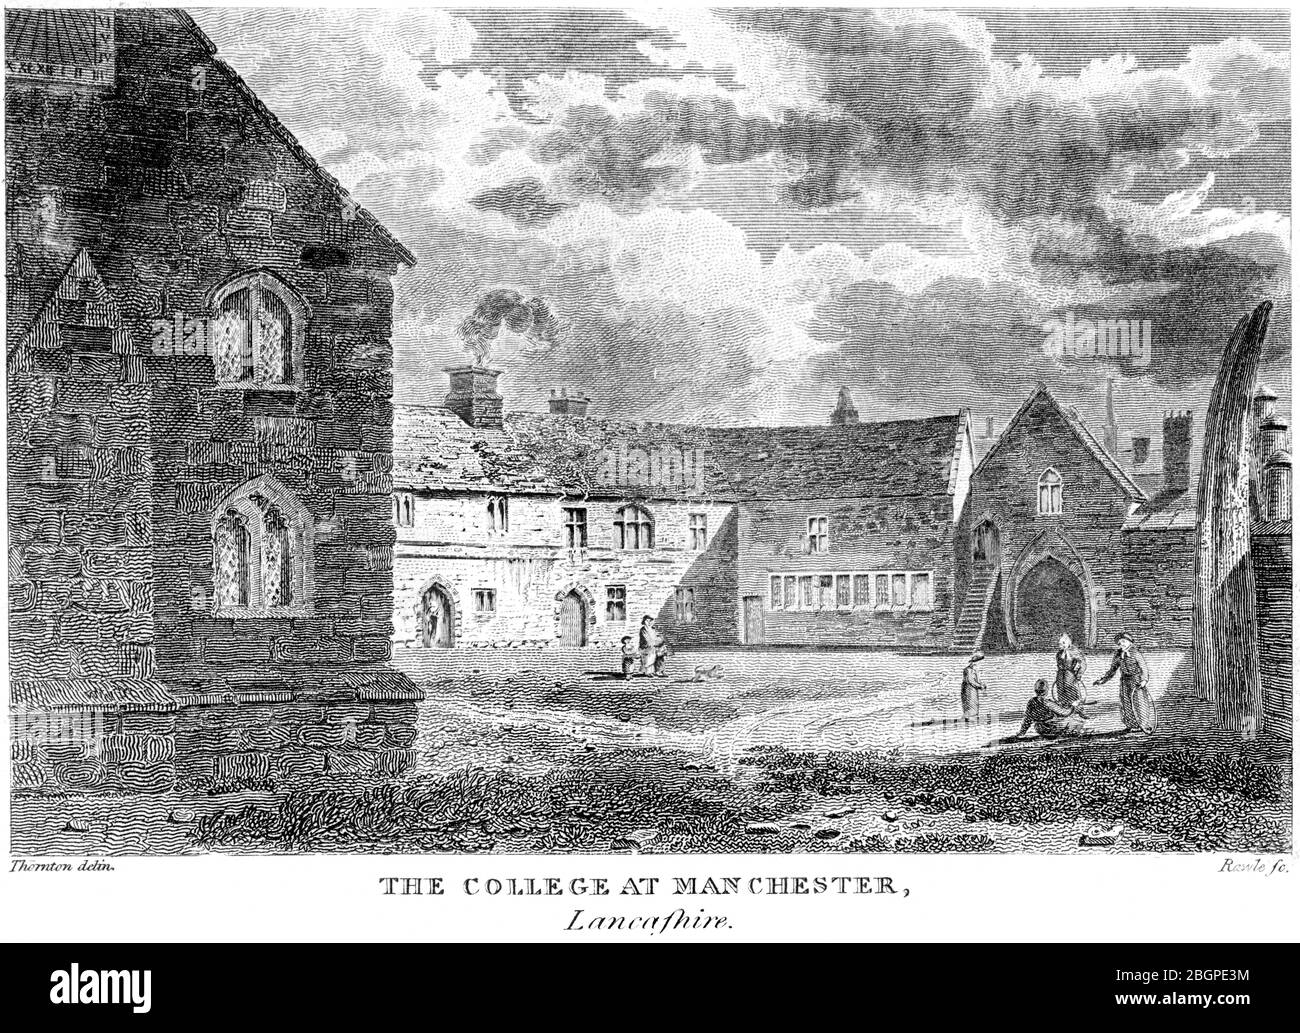 An engraving of The College at Manchester, Lancashire scanned at high resolution from a book printed in 1827.  Believed copyright free. Stock Photo